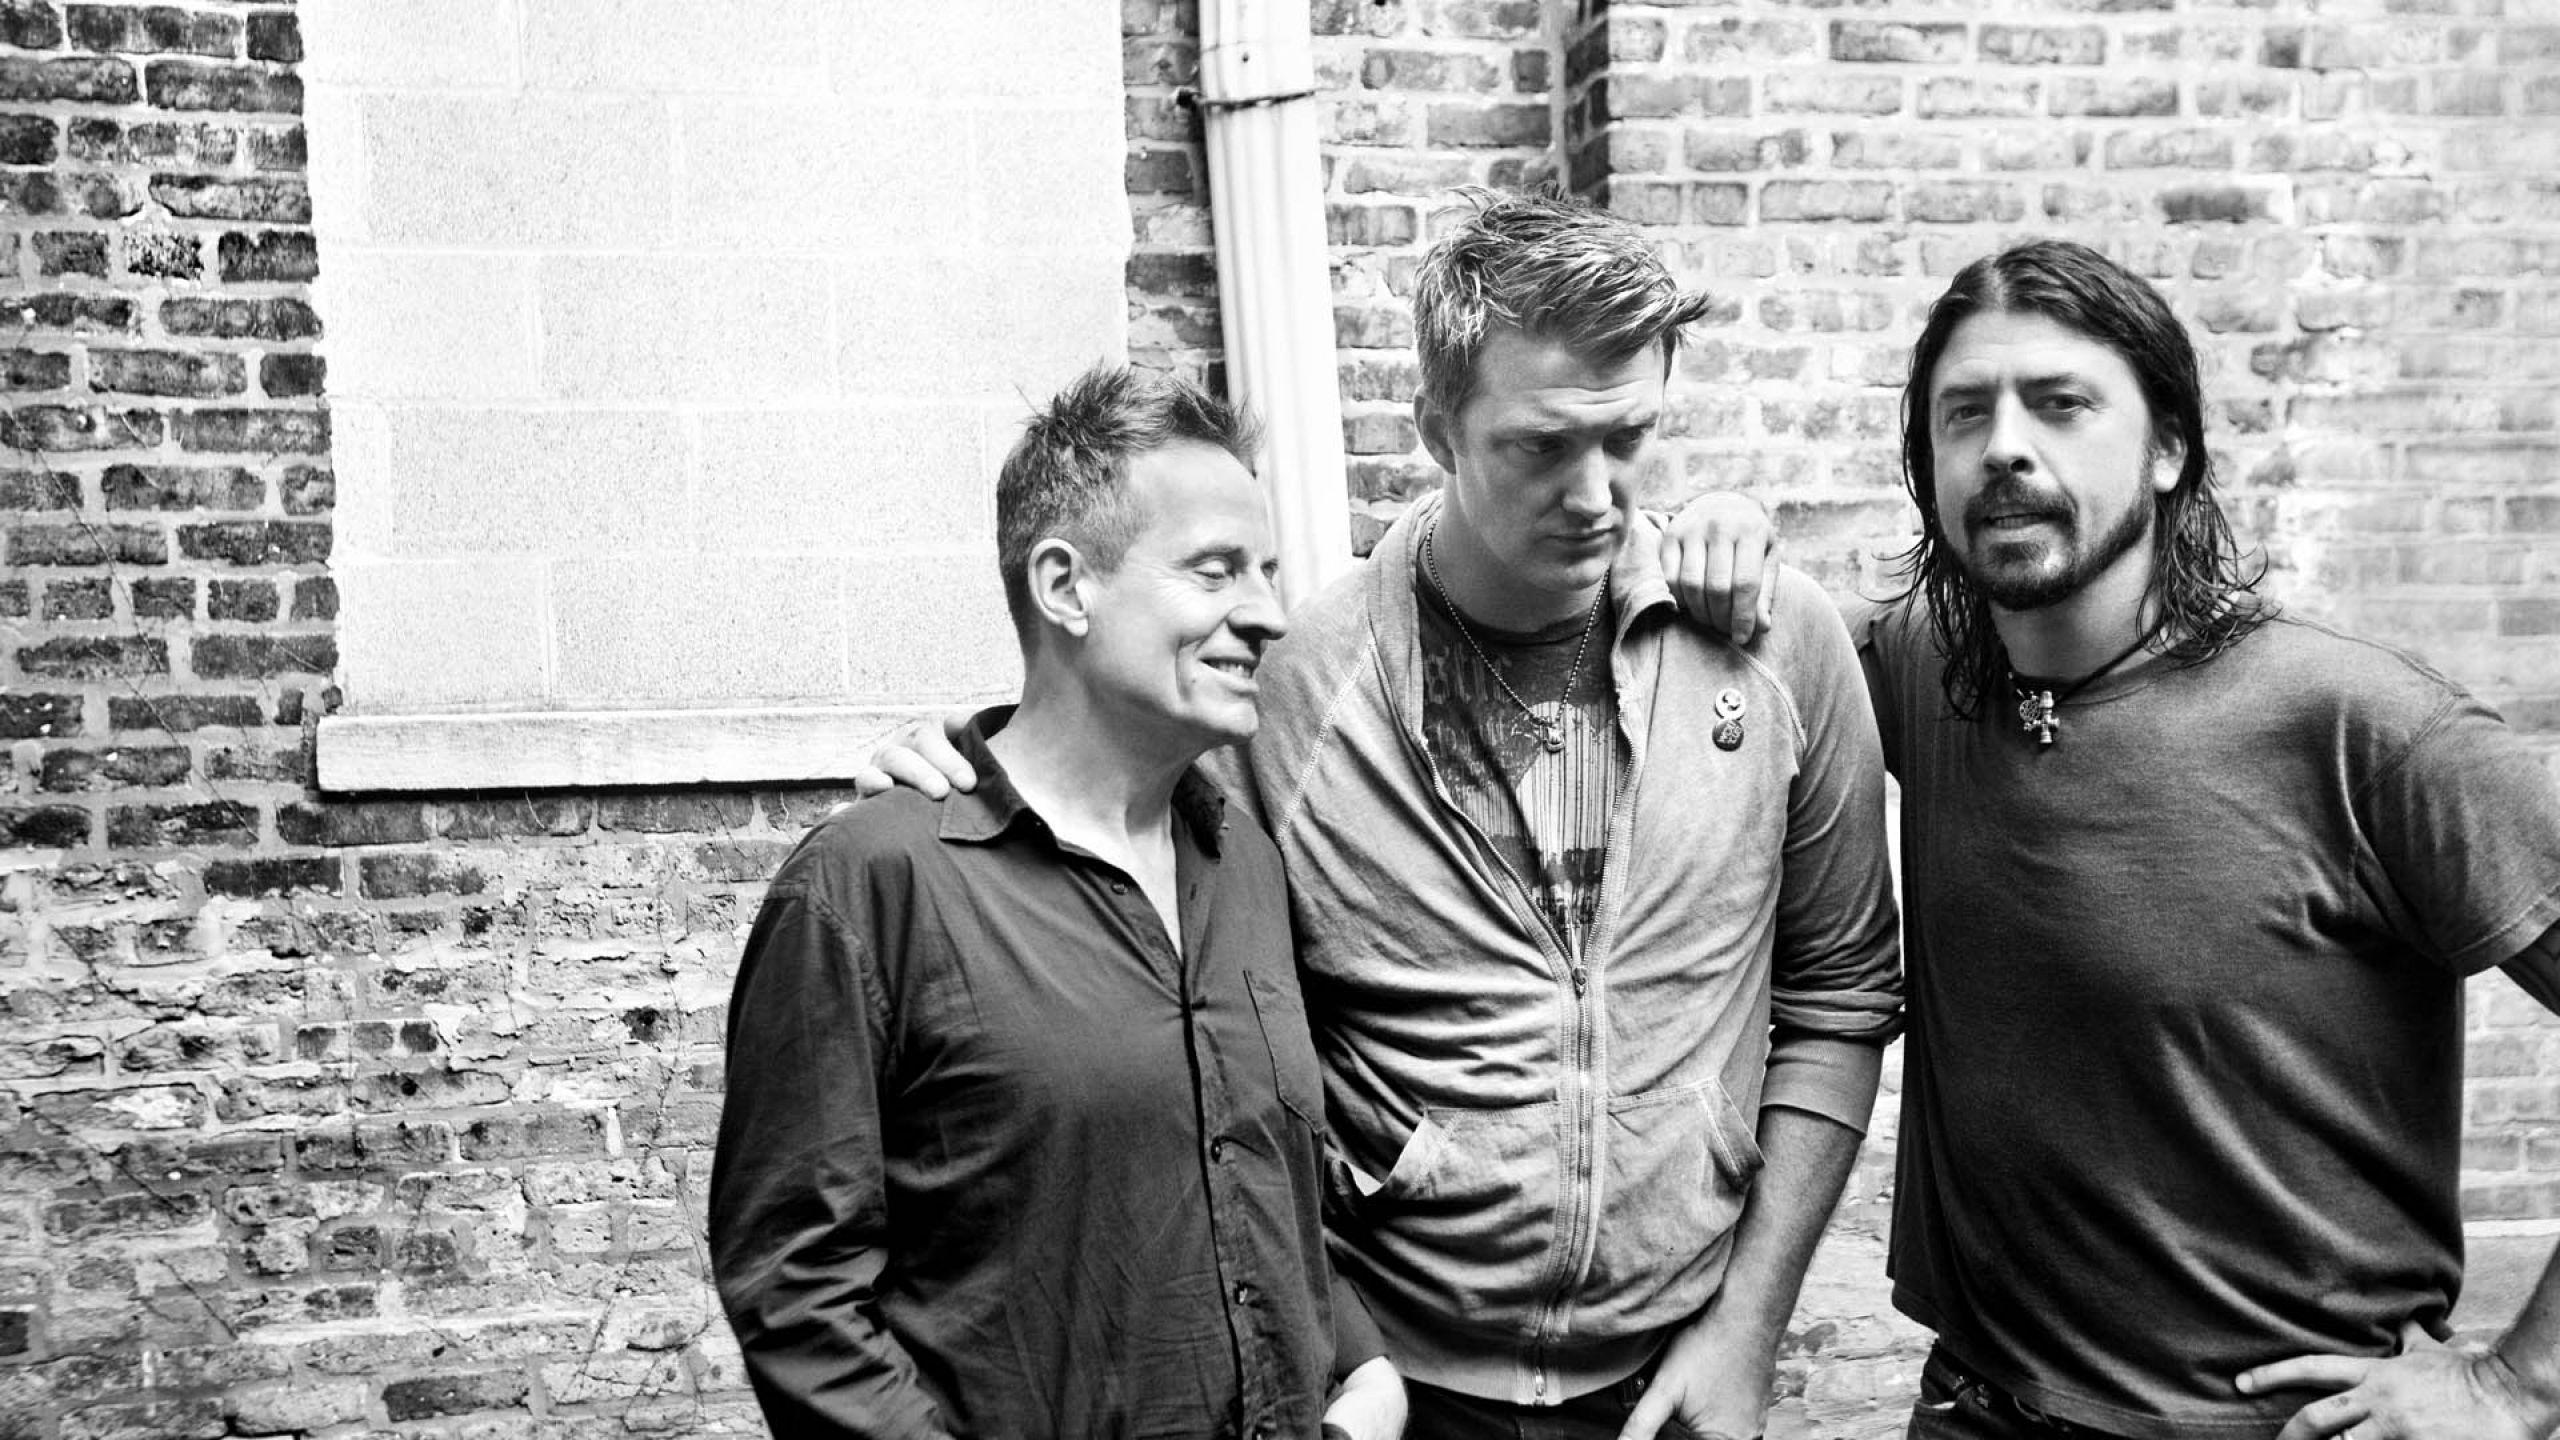 Download Wallpaper 2560x1440 Them crooked vultures, House, Wall